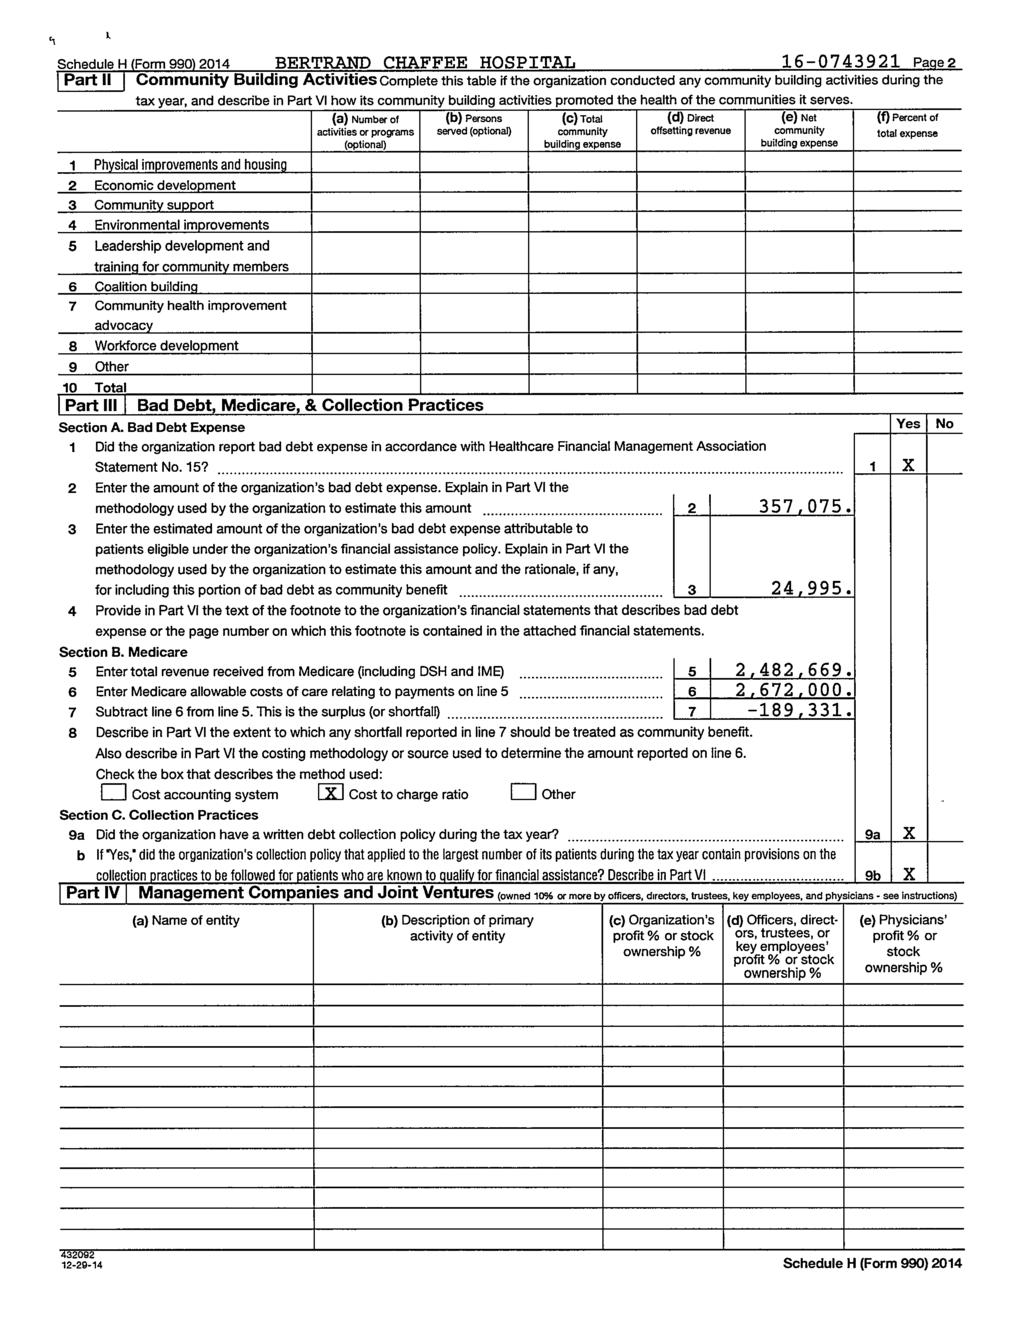 Schedule H (Form 990) 2014 BERTRAND CHAFFEE HOSPITAL 16-0743921 Page 2 I Part 11 Community Building Activities Complete this table if the organization conducted any community building activities